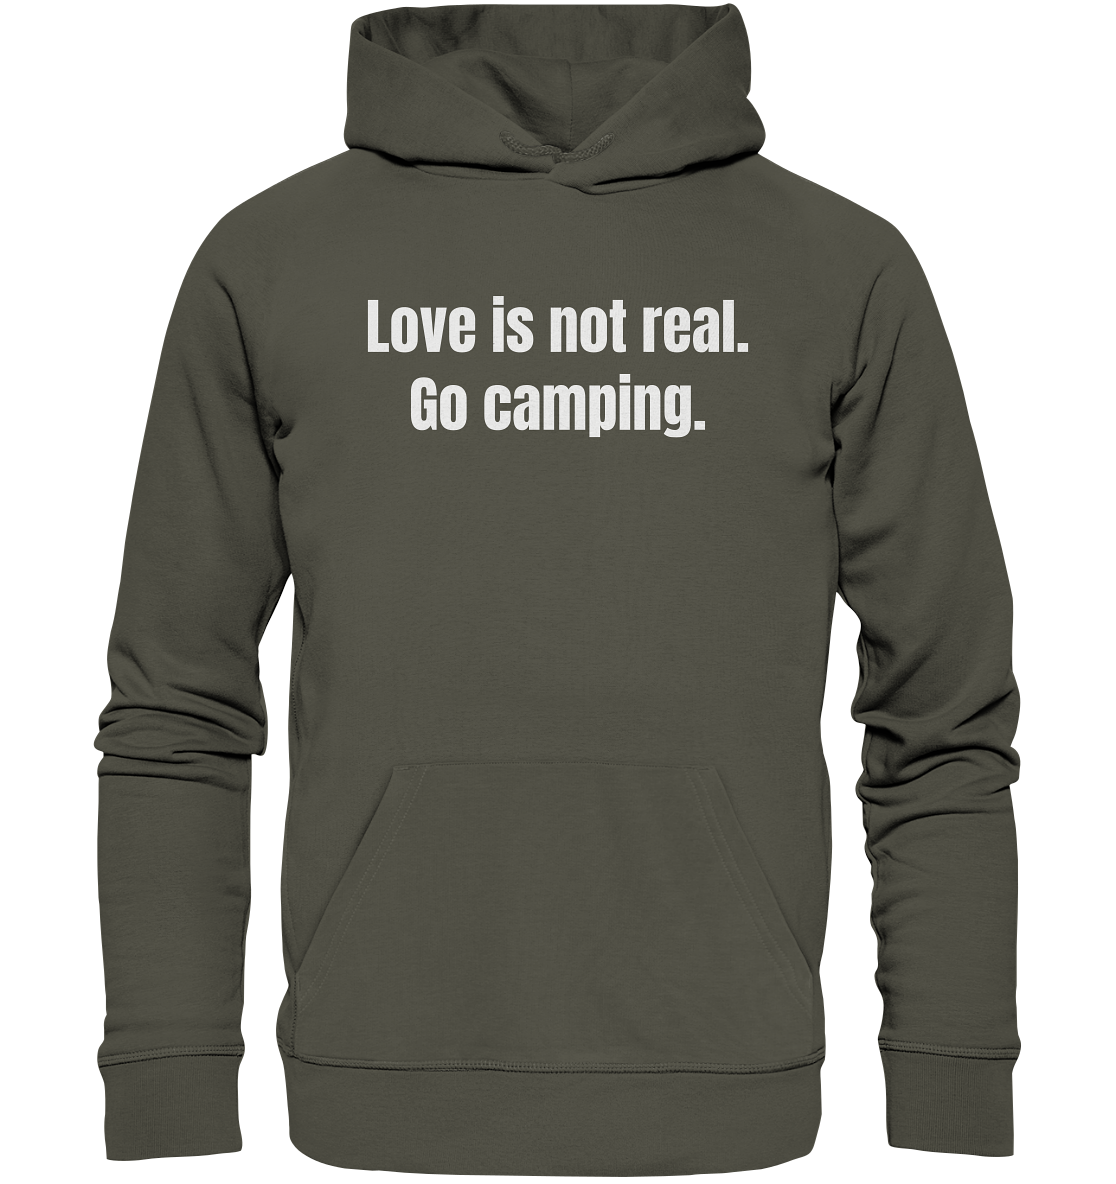 Love is not real. Go camping. - Organic Basic Hoodie